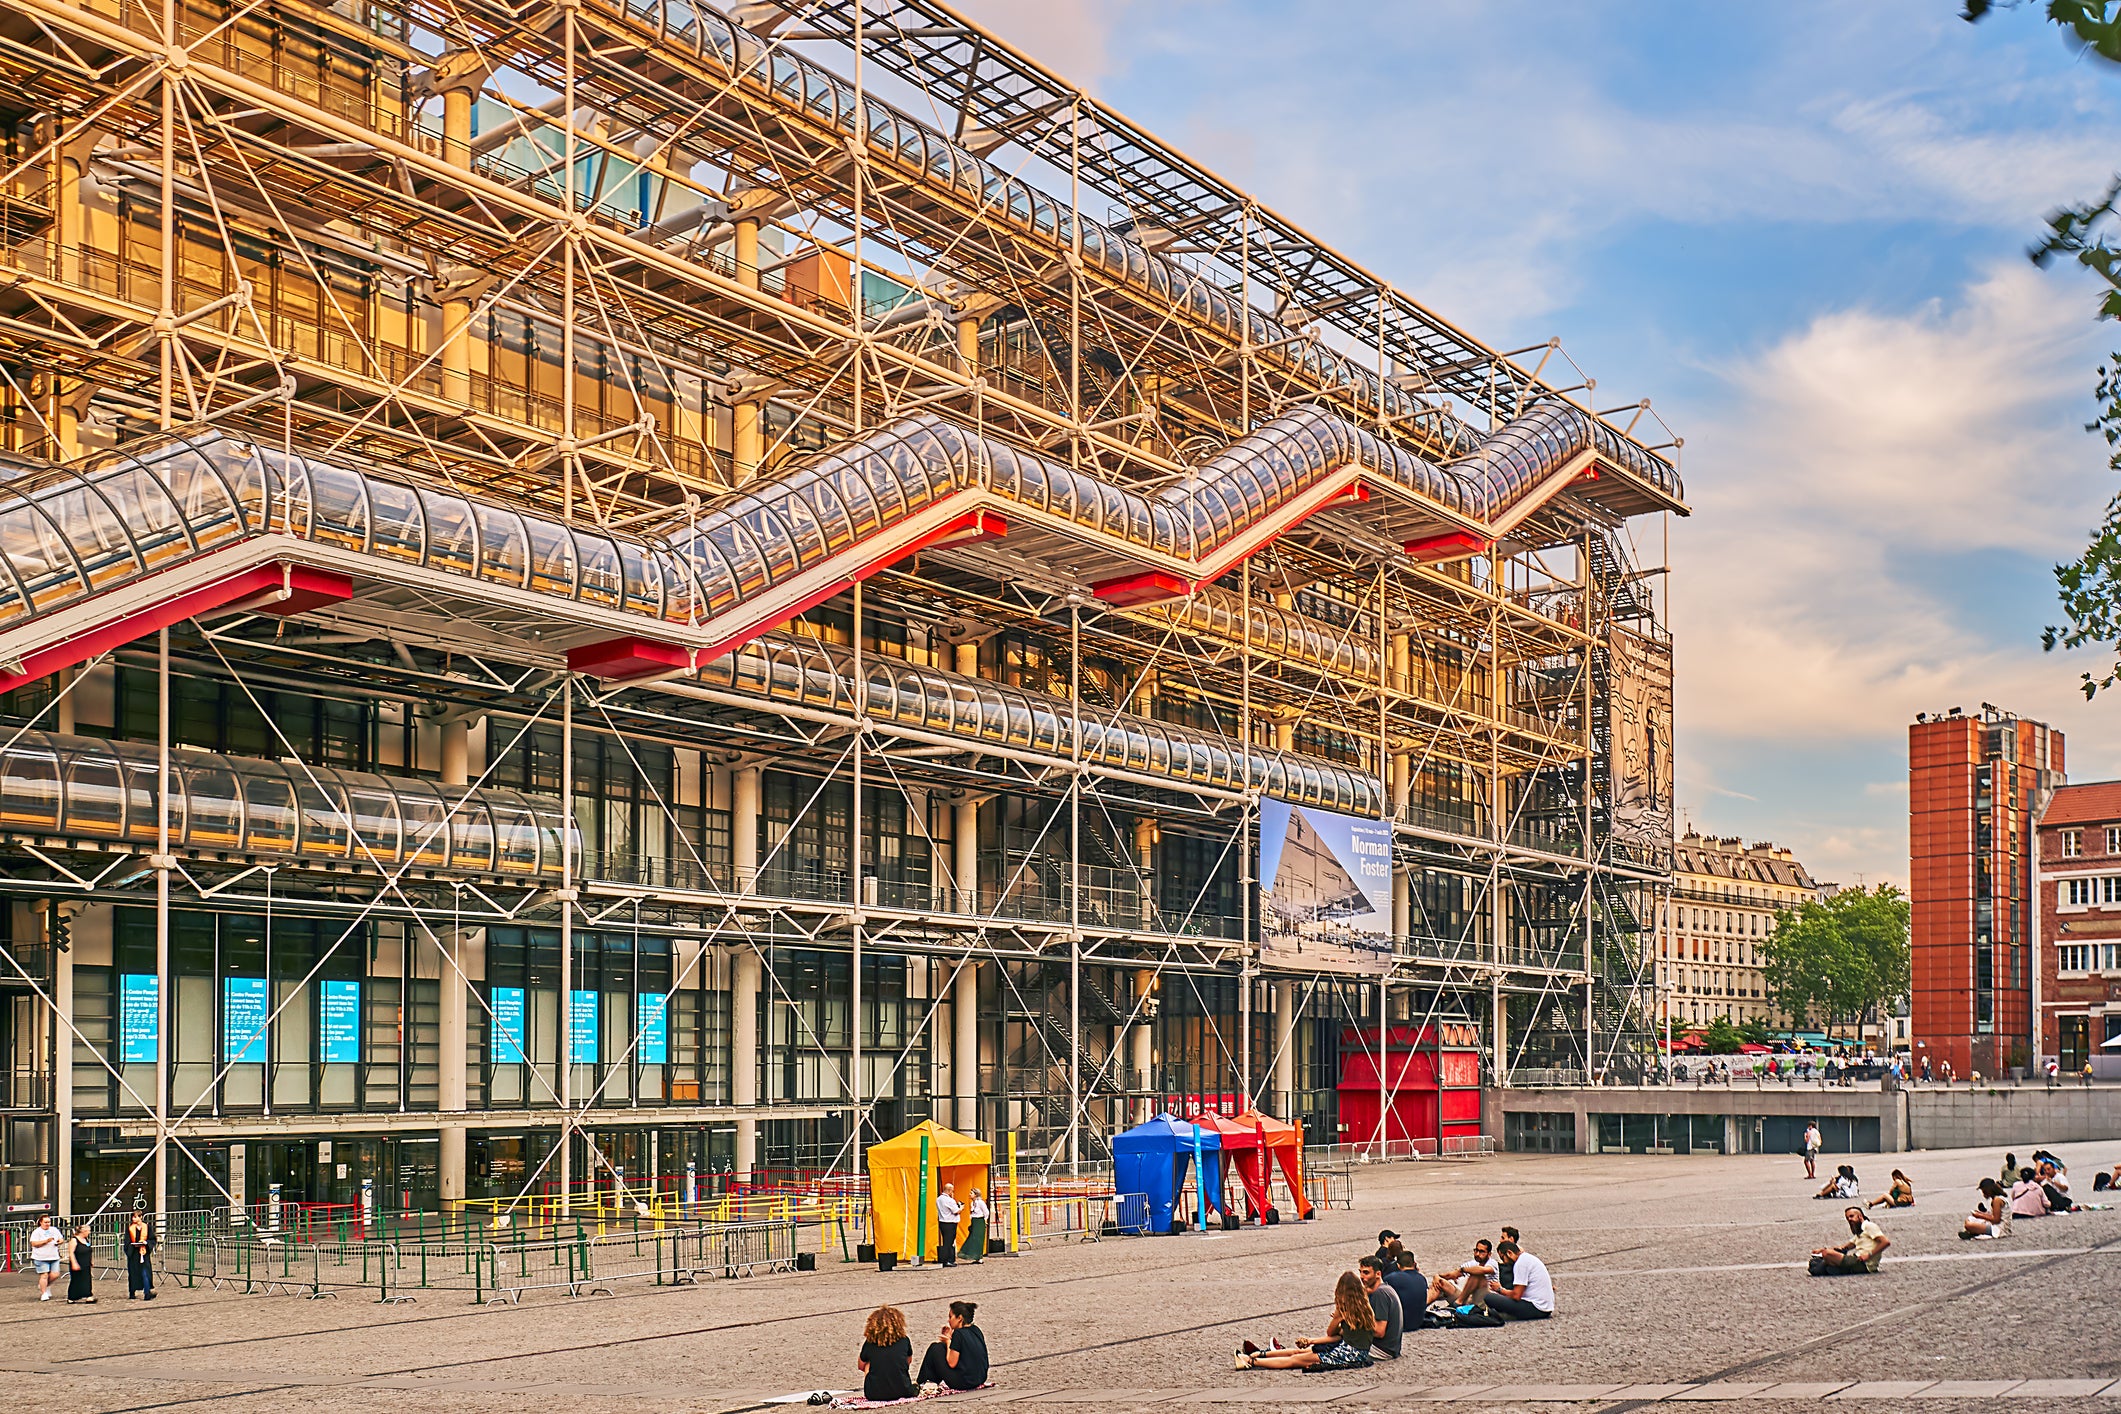 The Centre Pompidou gallery, in its pomp